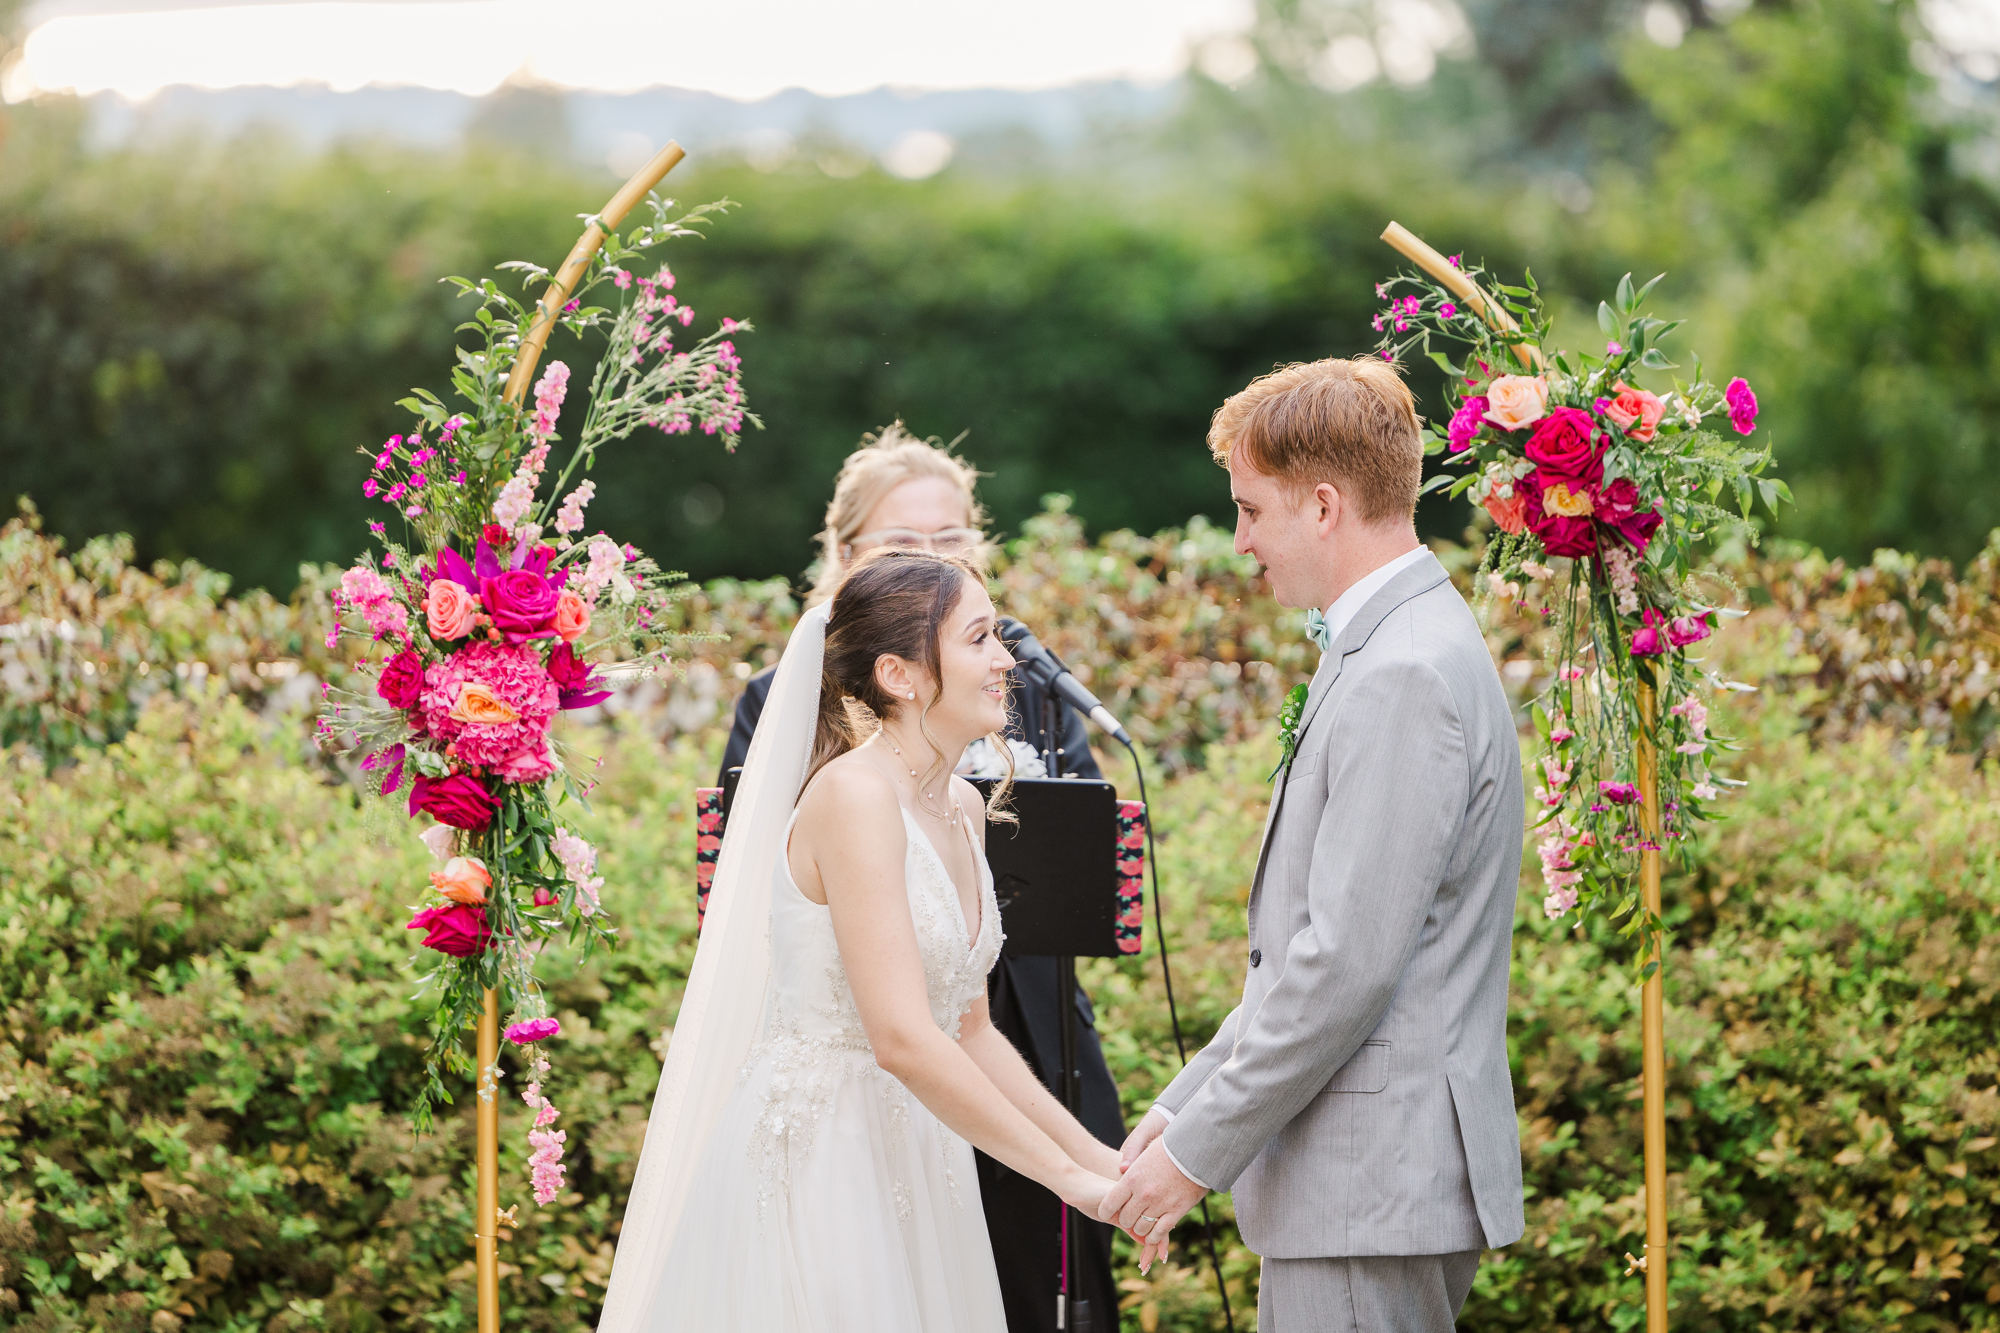 Flawless Wedding at Briarcliff Manor in Summertime